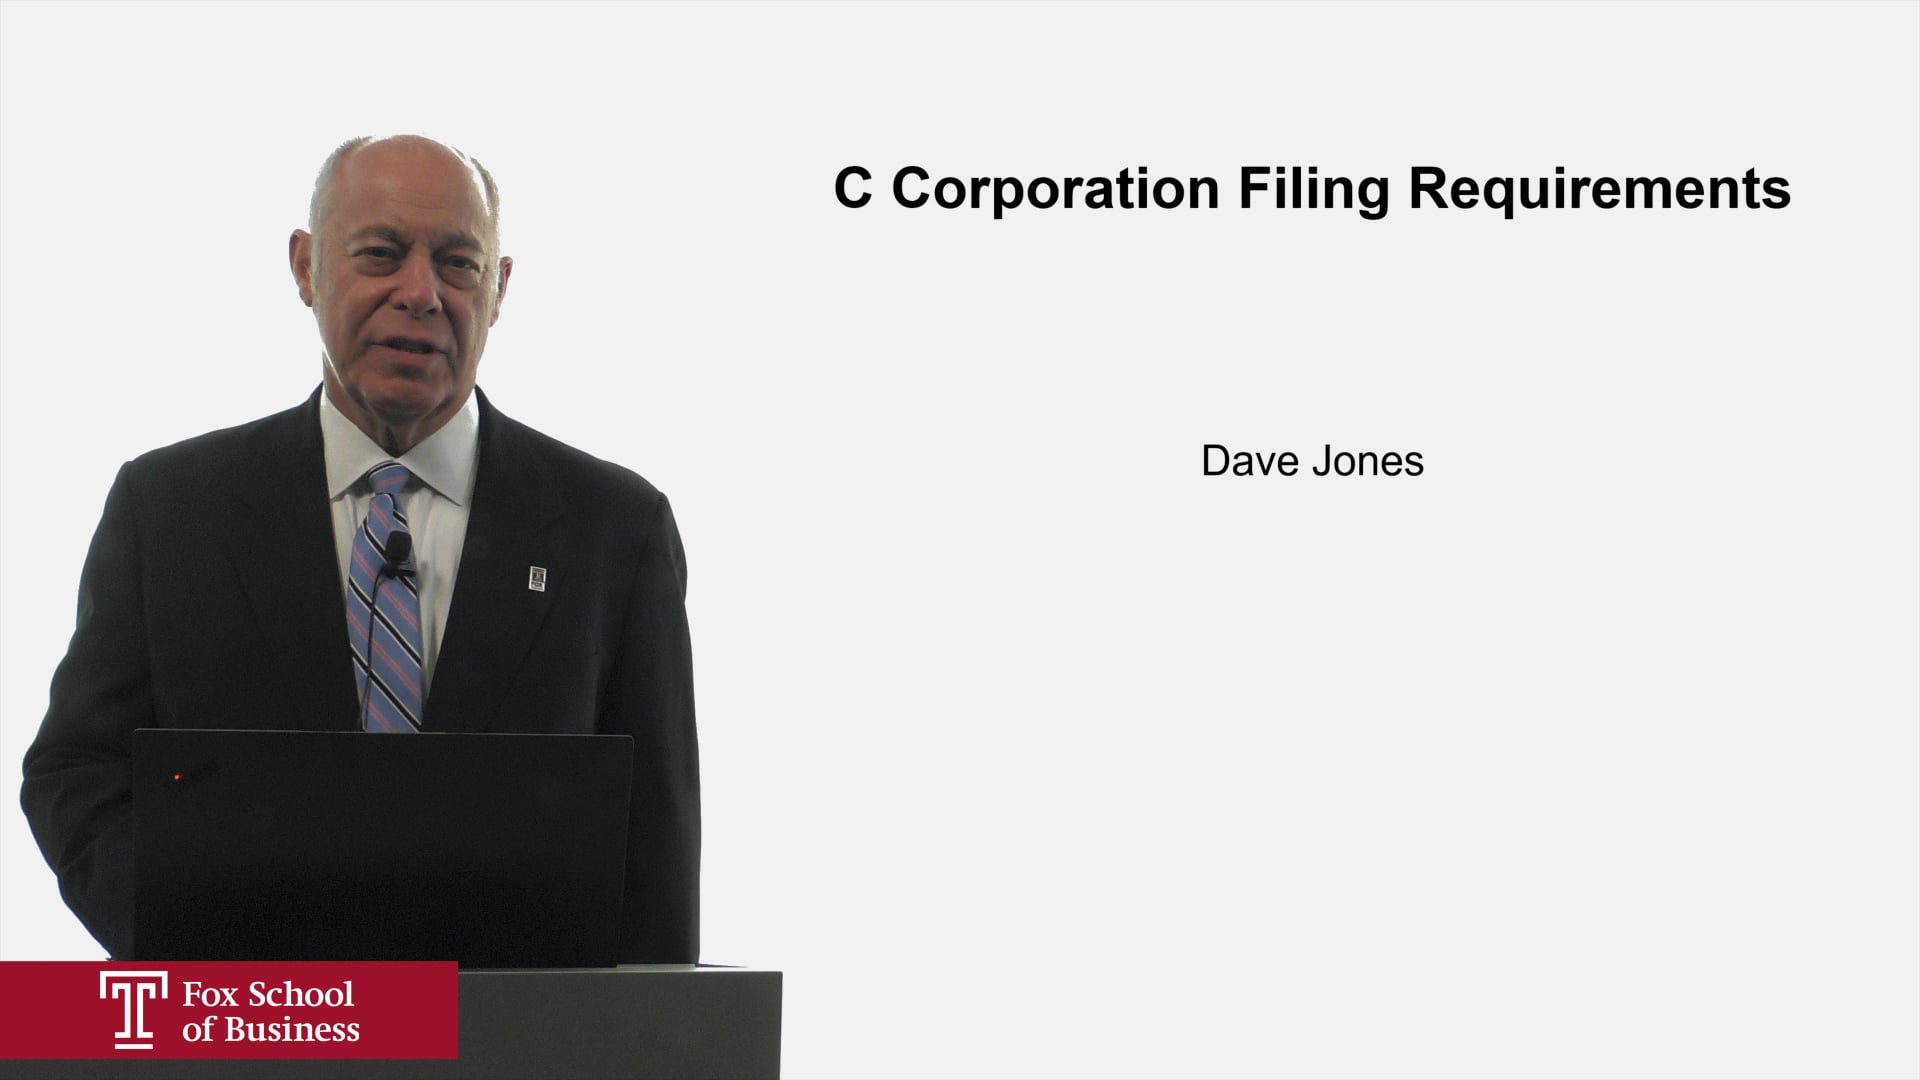 C Corporation Filing Requirements